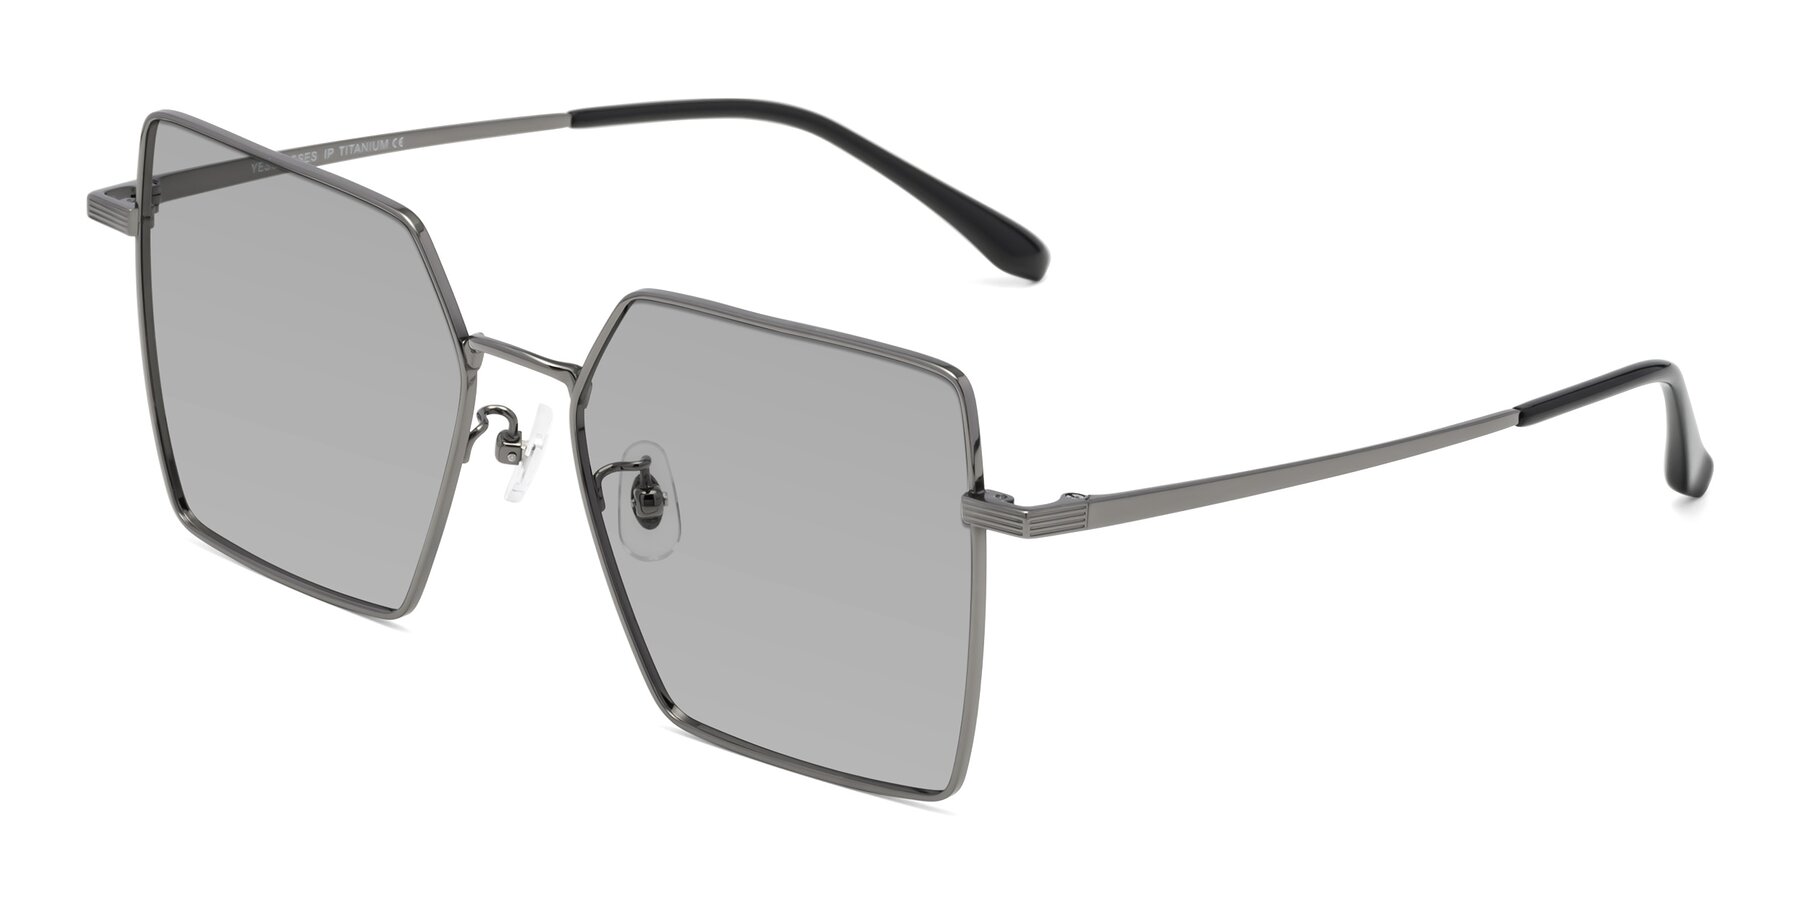 Angle of La Villa in Gunmetal with Light Gray Tinted Lenses